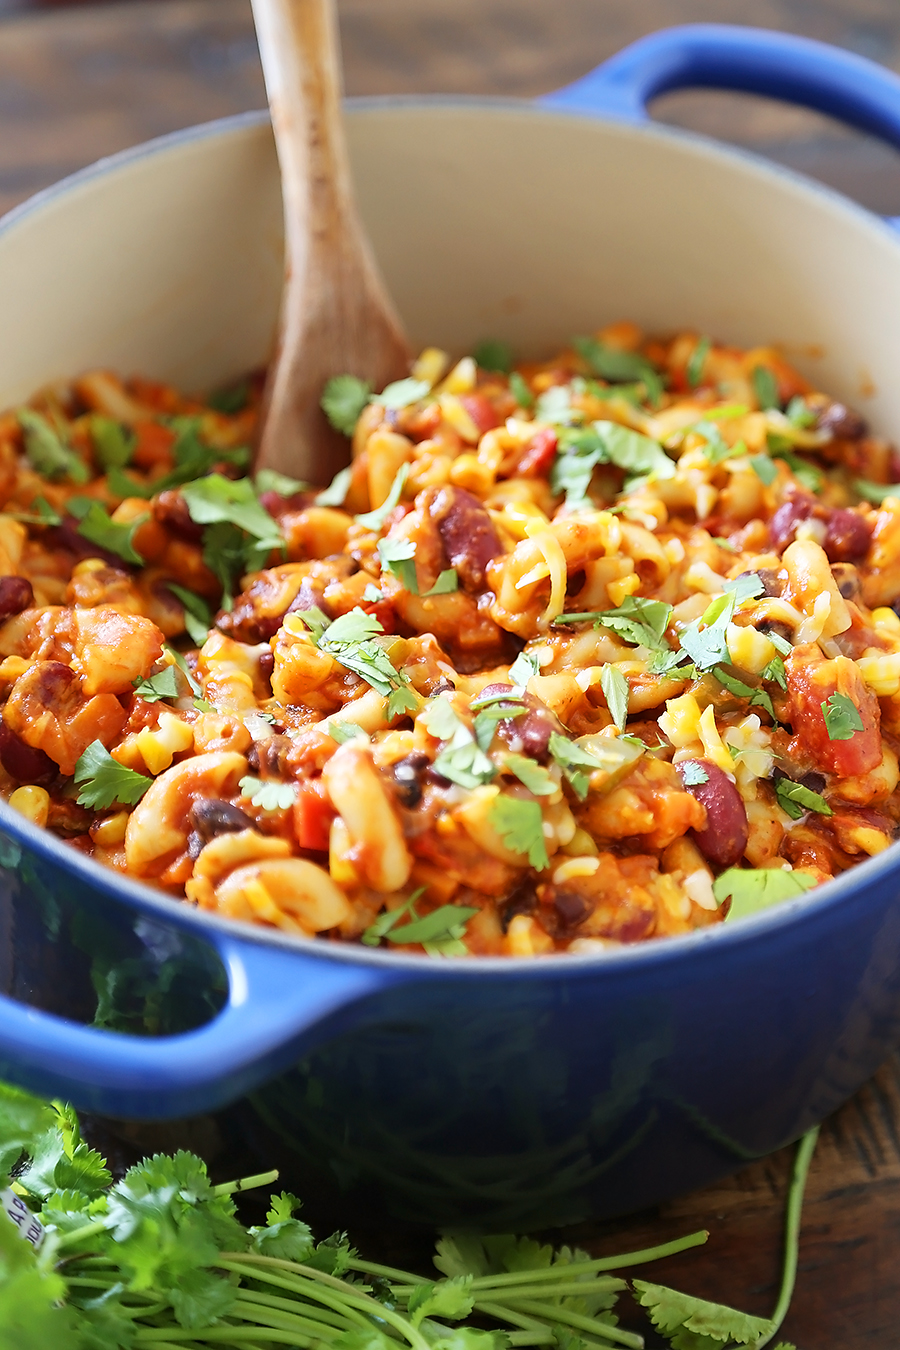 One-Pot Cheesy Vegetarian Chili Mac 'n Cheese - Super cheesy, comforting and easy to make for meatless weeknights with family! Full of fresh veggies, beans, tomatoes and tender pasta! Thecomfortofcooking.com